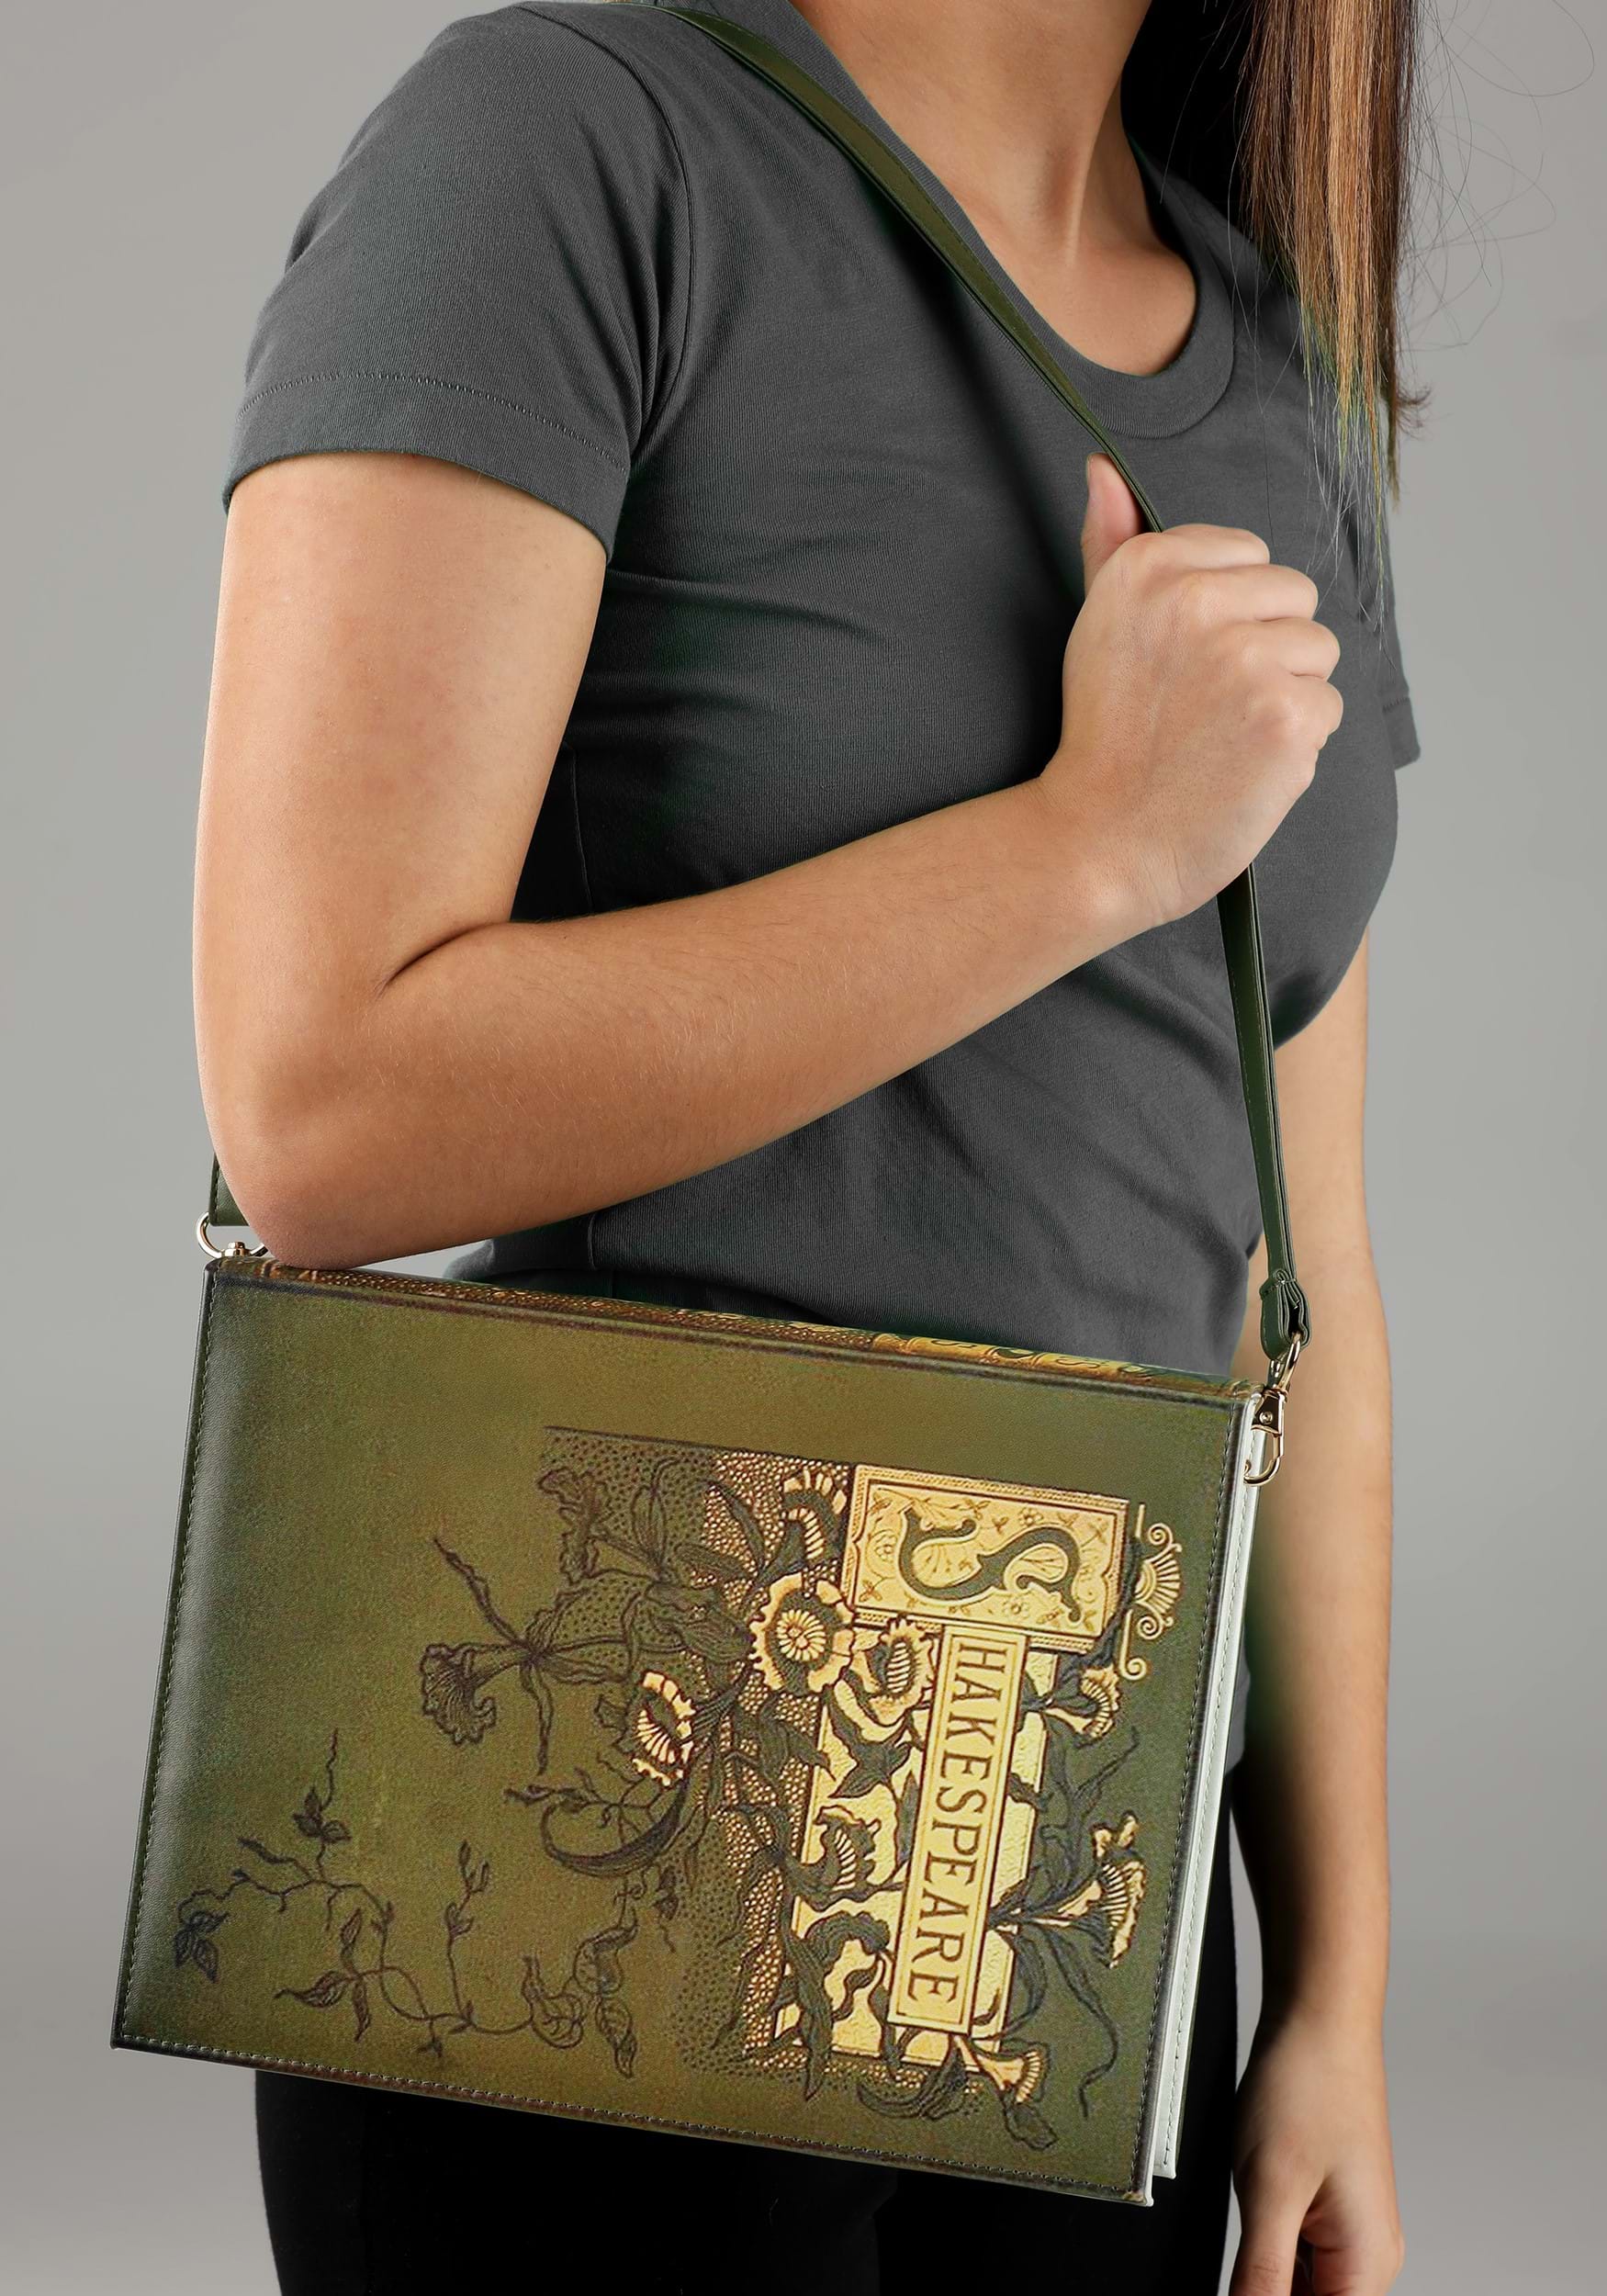 Shakespeare Book Costume Bag , Historical Accessories